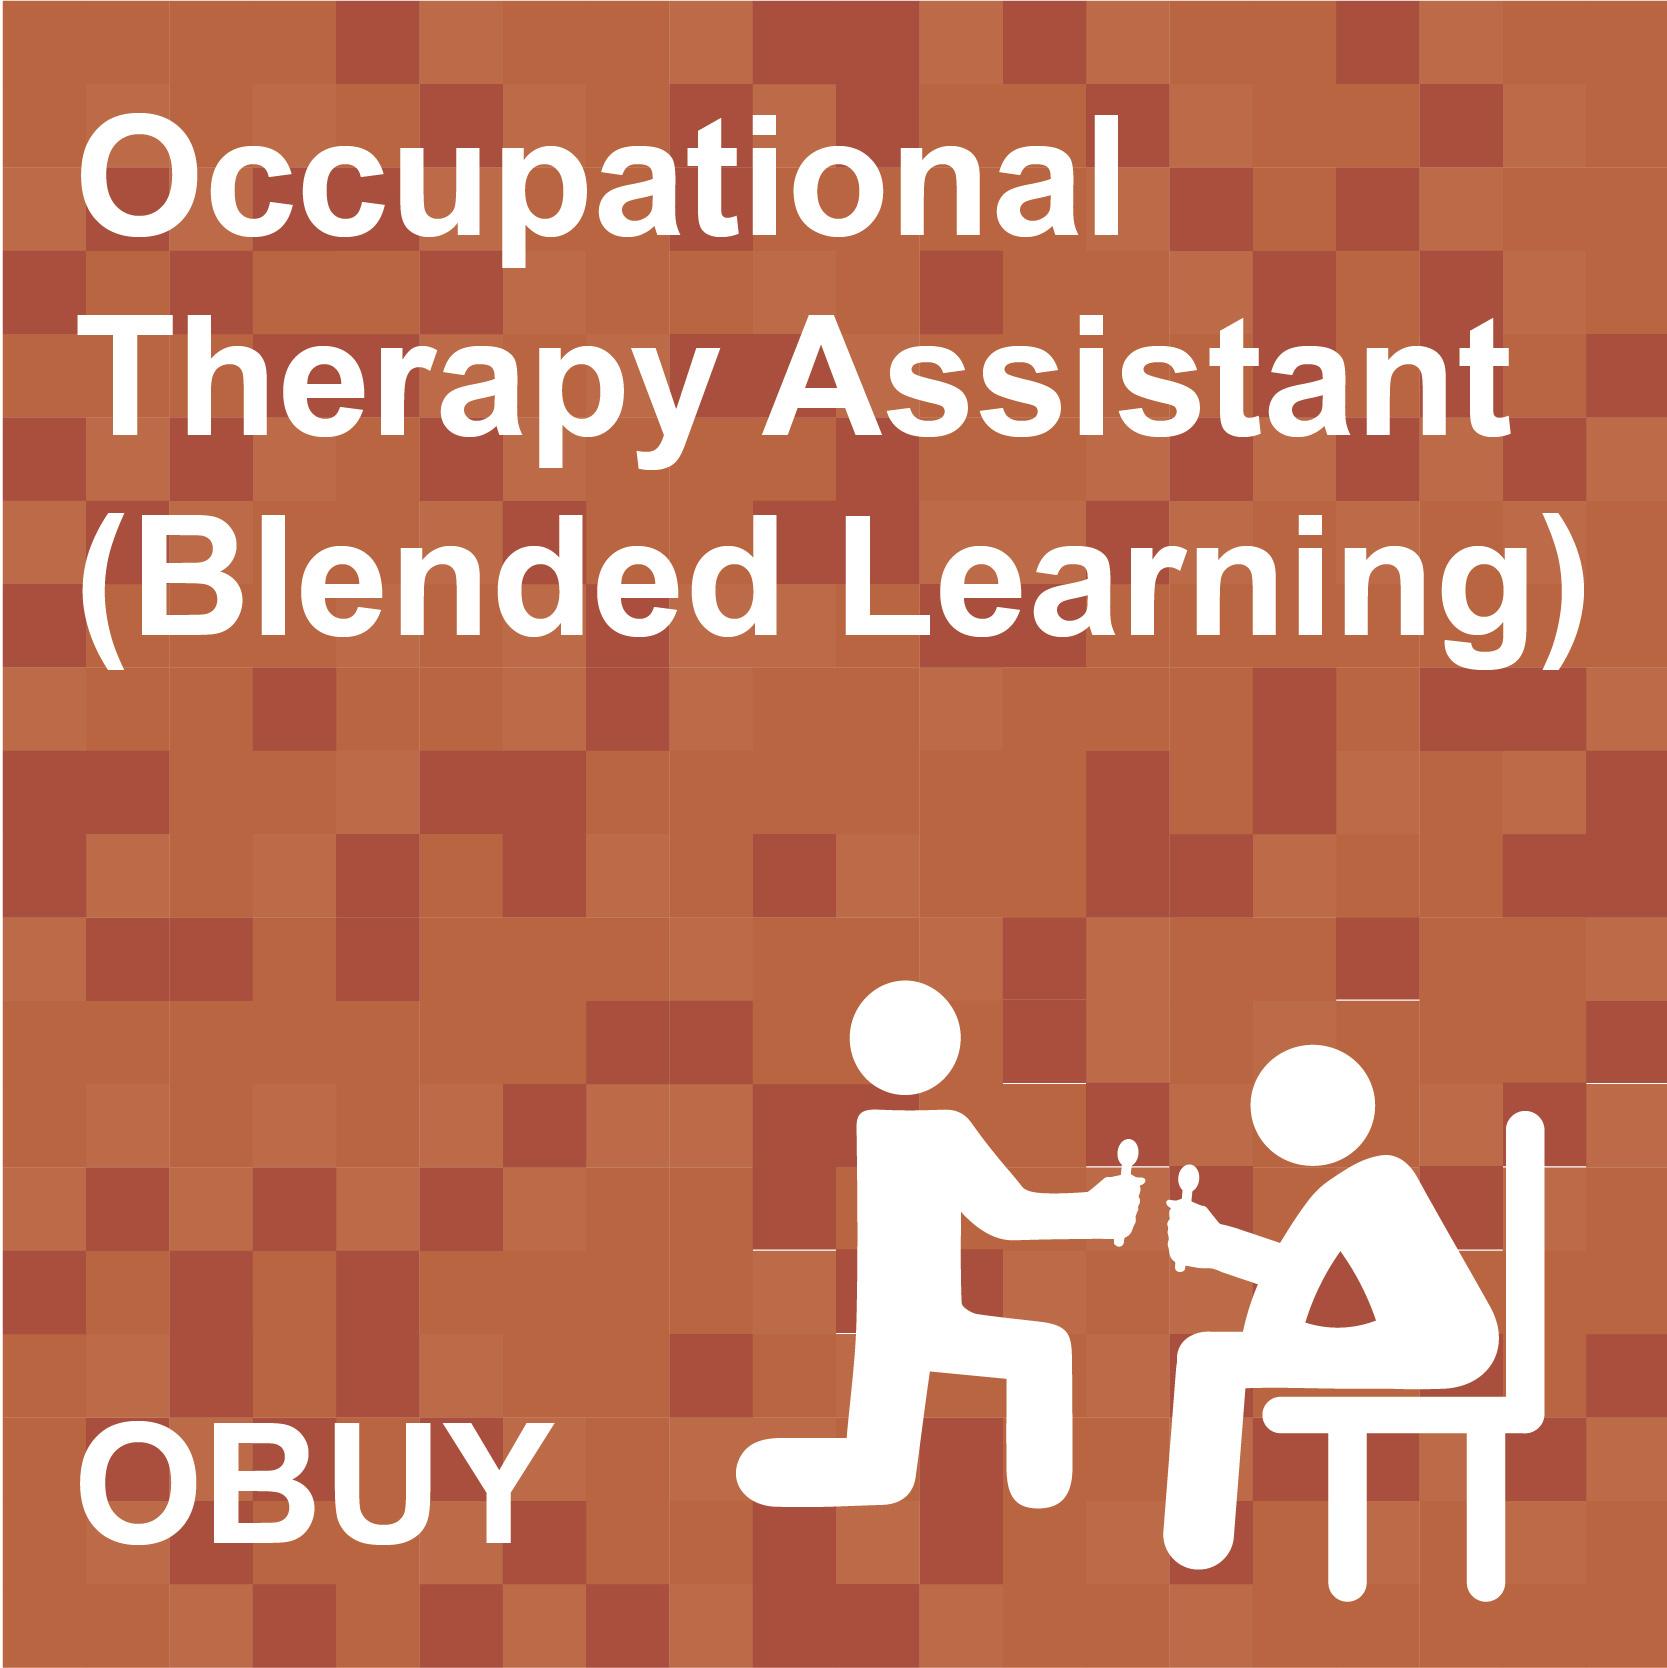 Occupational Therapy Assistant Training Course (Blended Learning) (Jockey Club Allied Health Assistants Blended Training Programme)